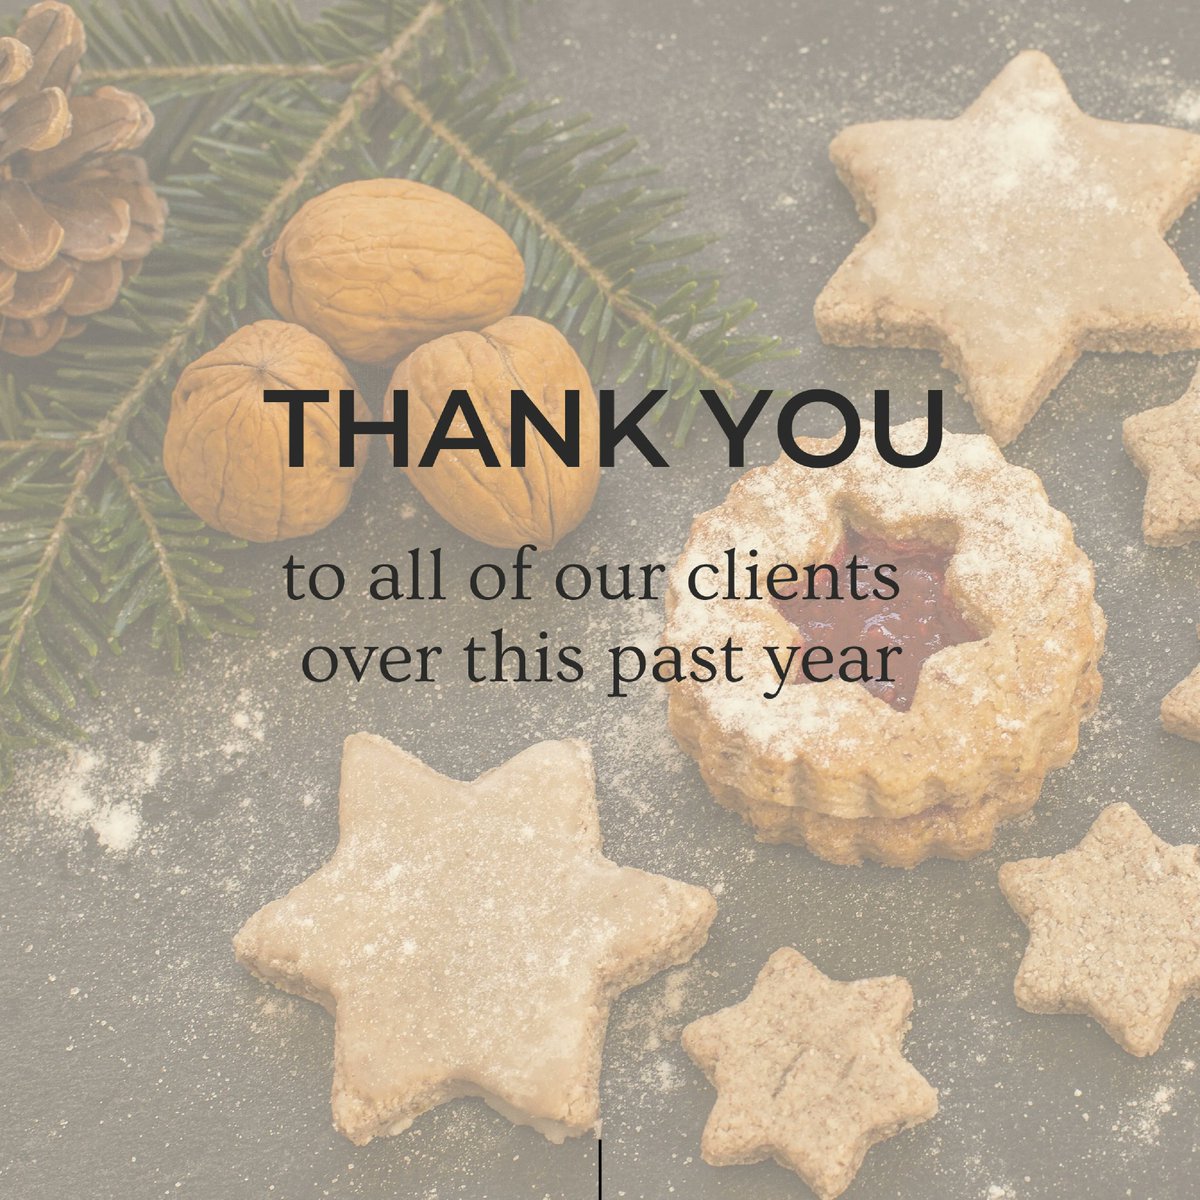 Thank you, to all of our clients and colleagues - here's to another happy and healthy year ahead.